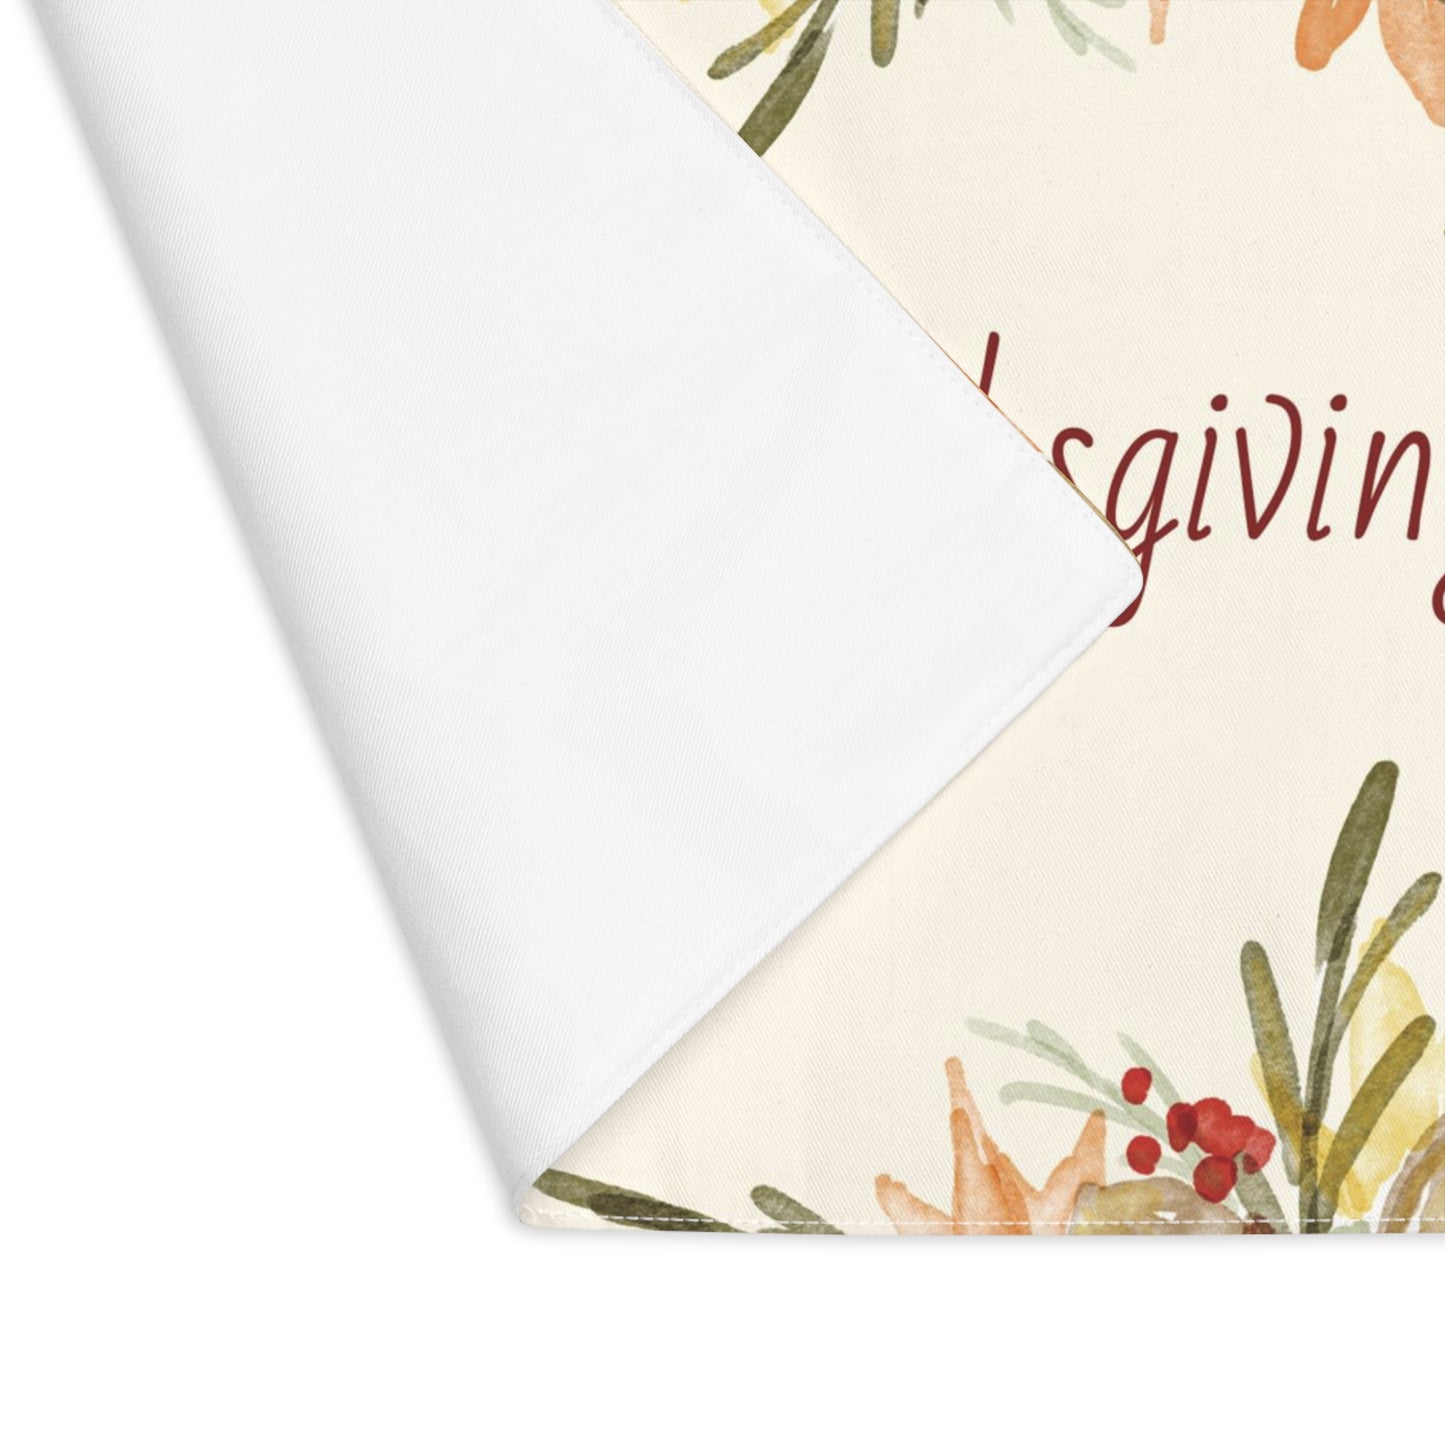 Happy Thanksgiving Placemat, 1pc